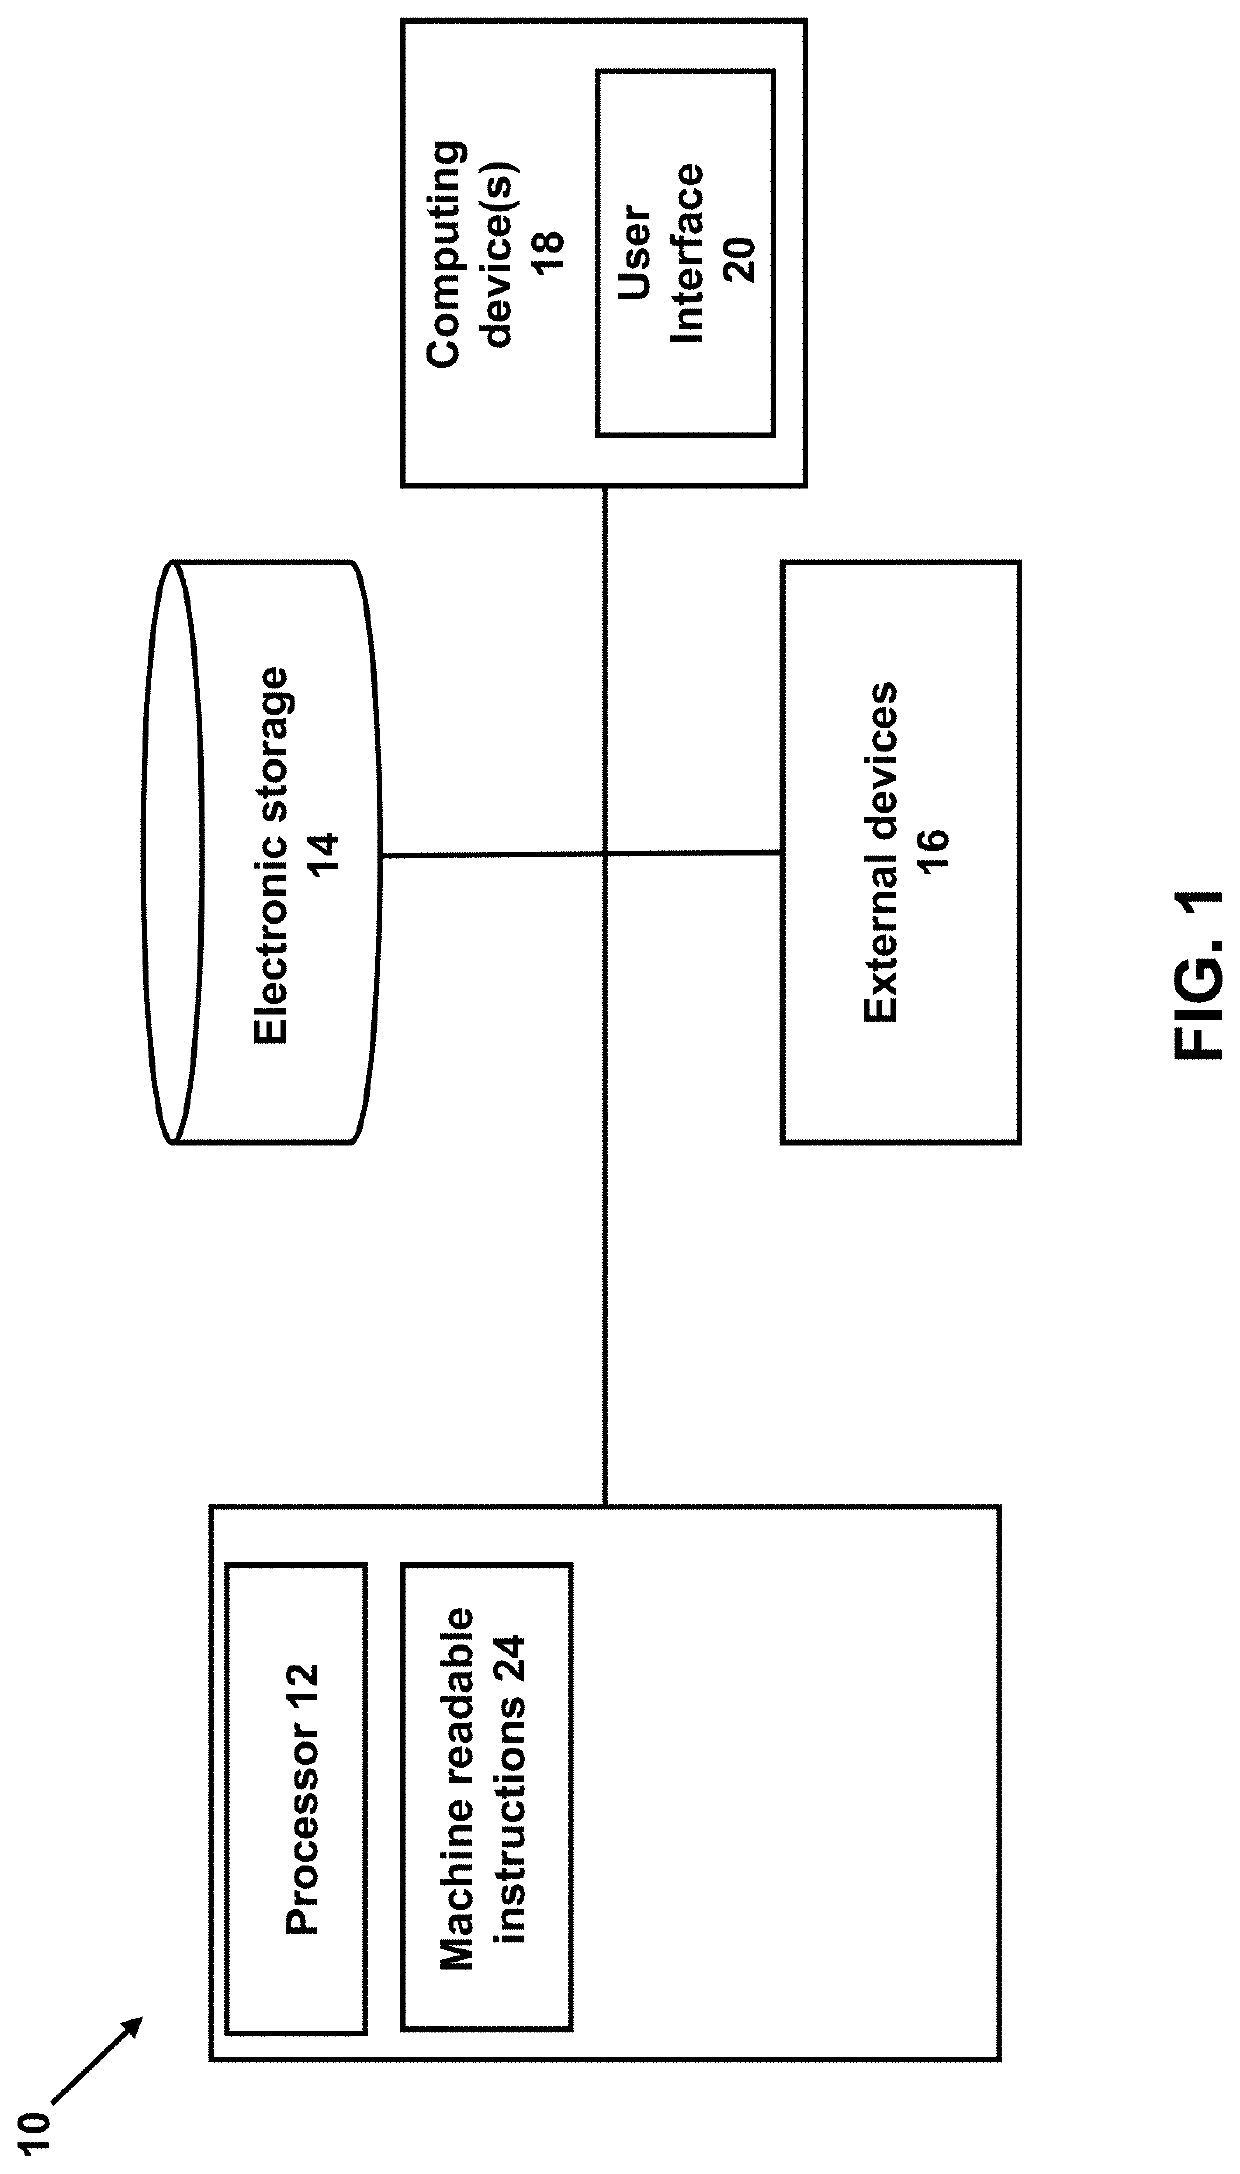 System and method for monitoring gas exchange